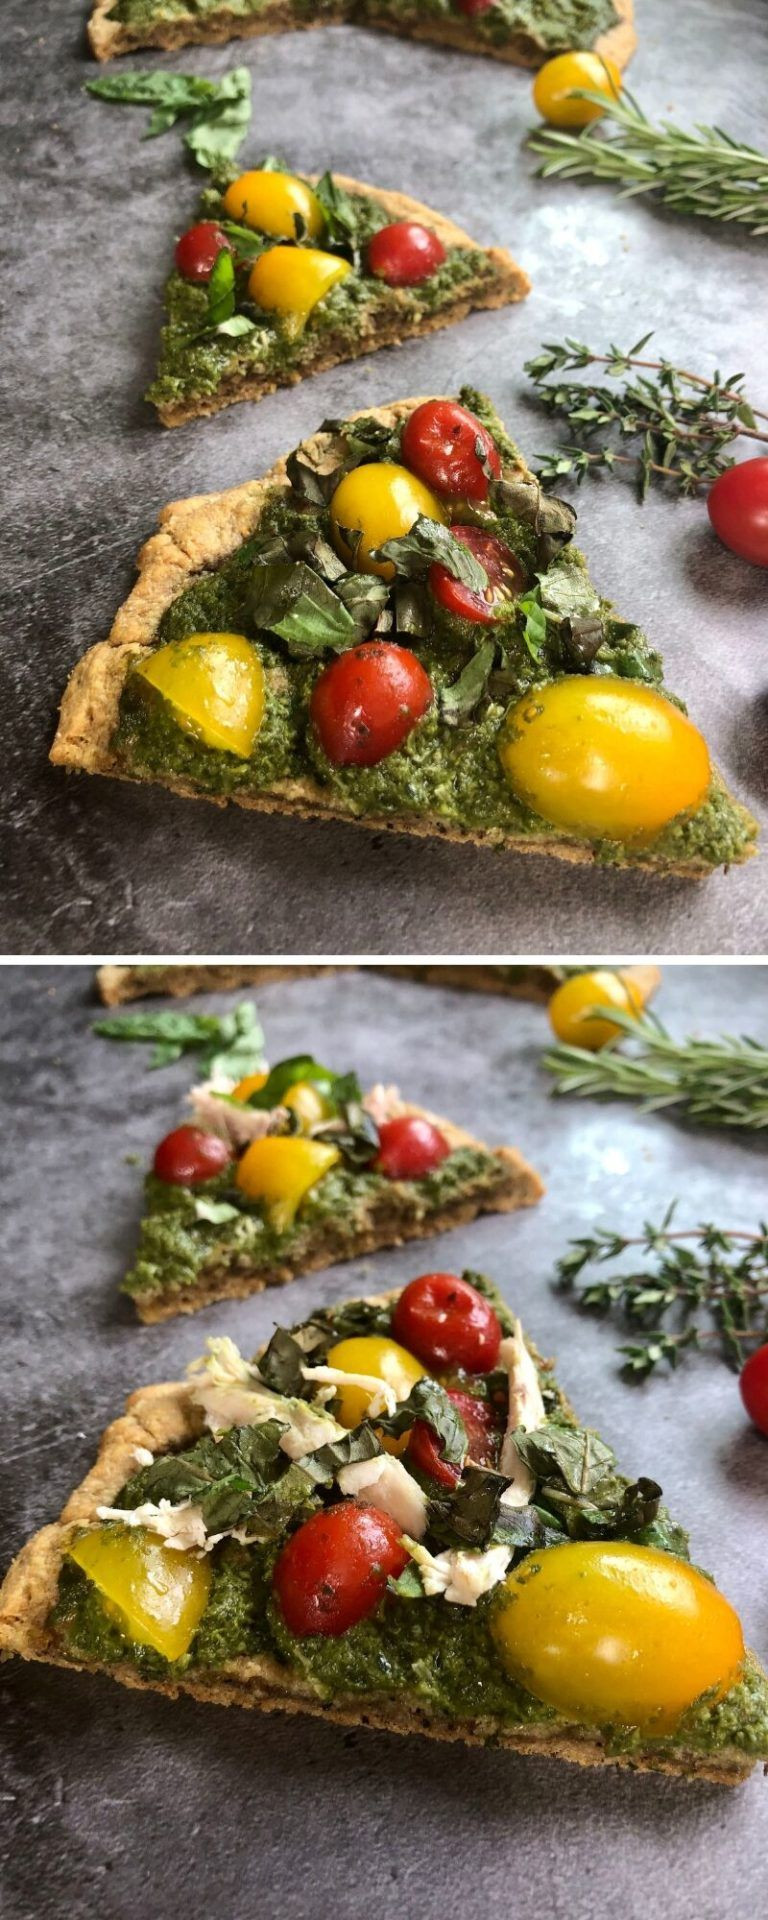 Gluten Free Pizza Dough Whole Foods
 Easy Gluten Free Herbed Pizza Crust